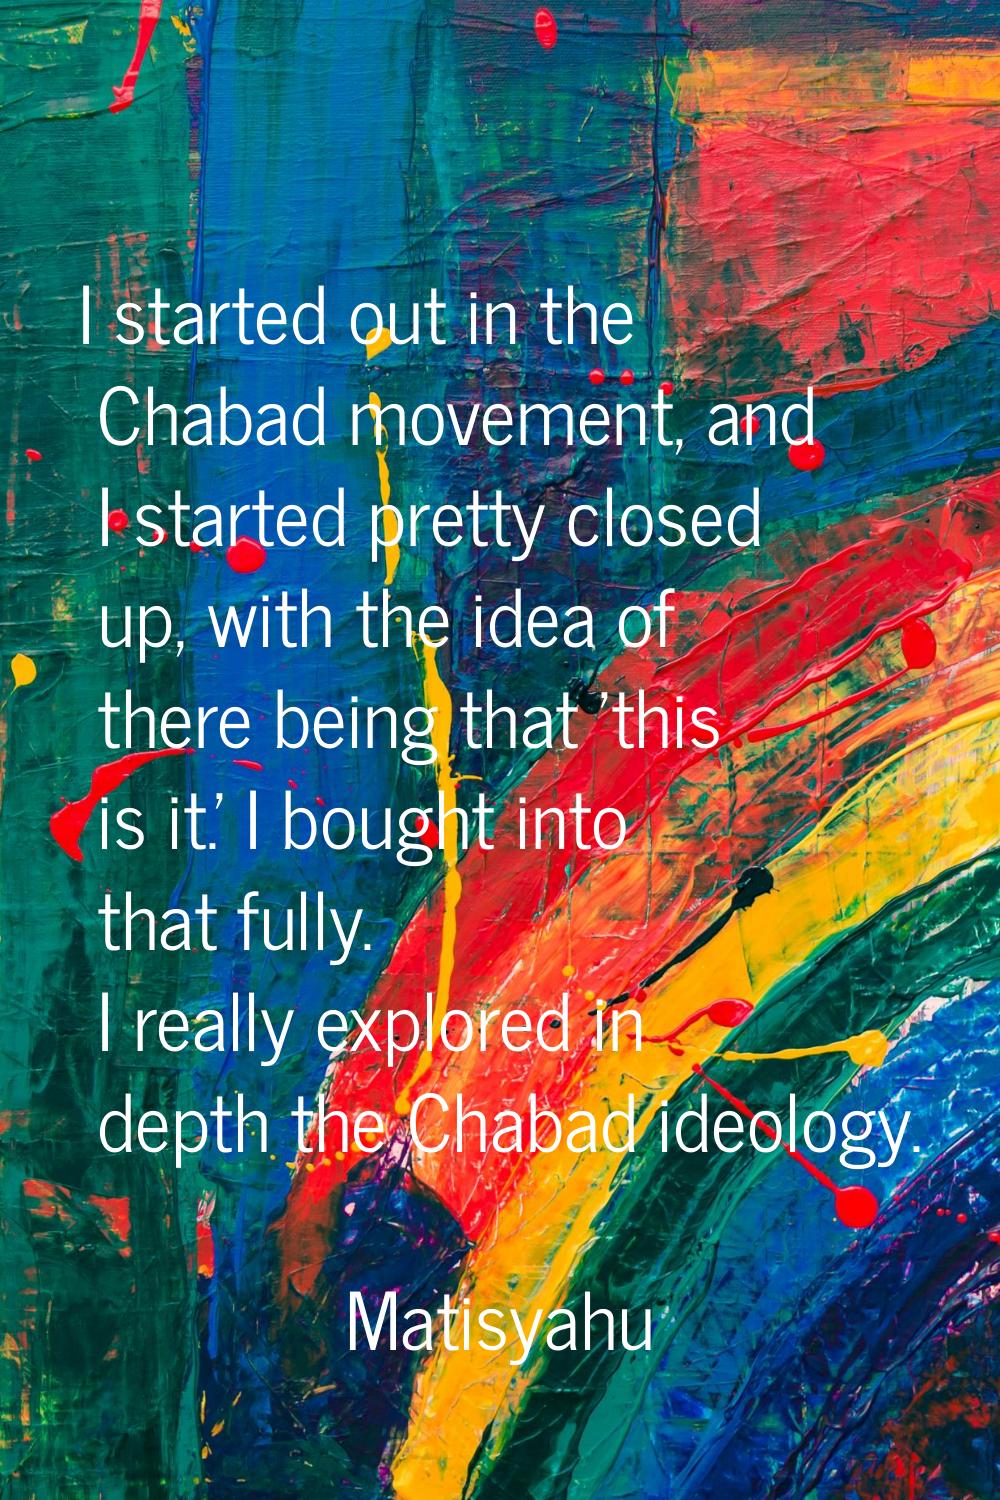 I started out in the Chabad movement, and I started pretty closed up, with the idea of there being 